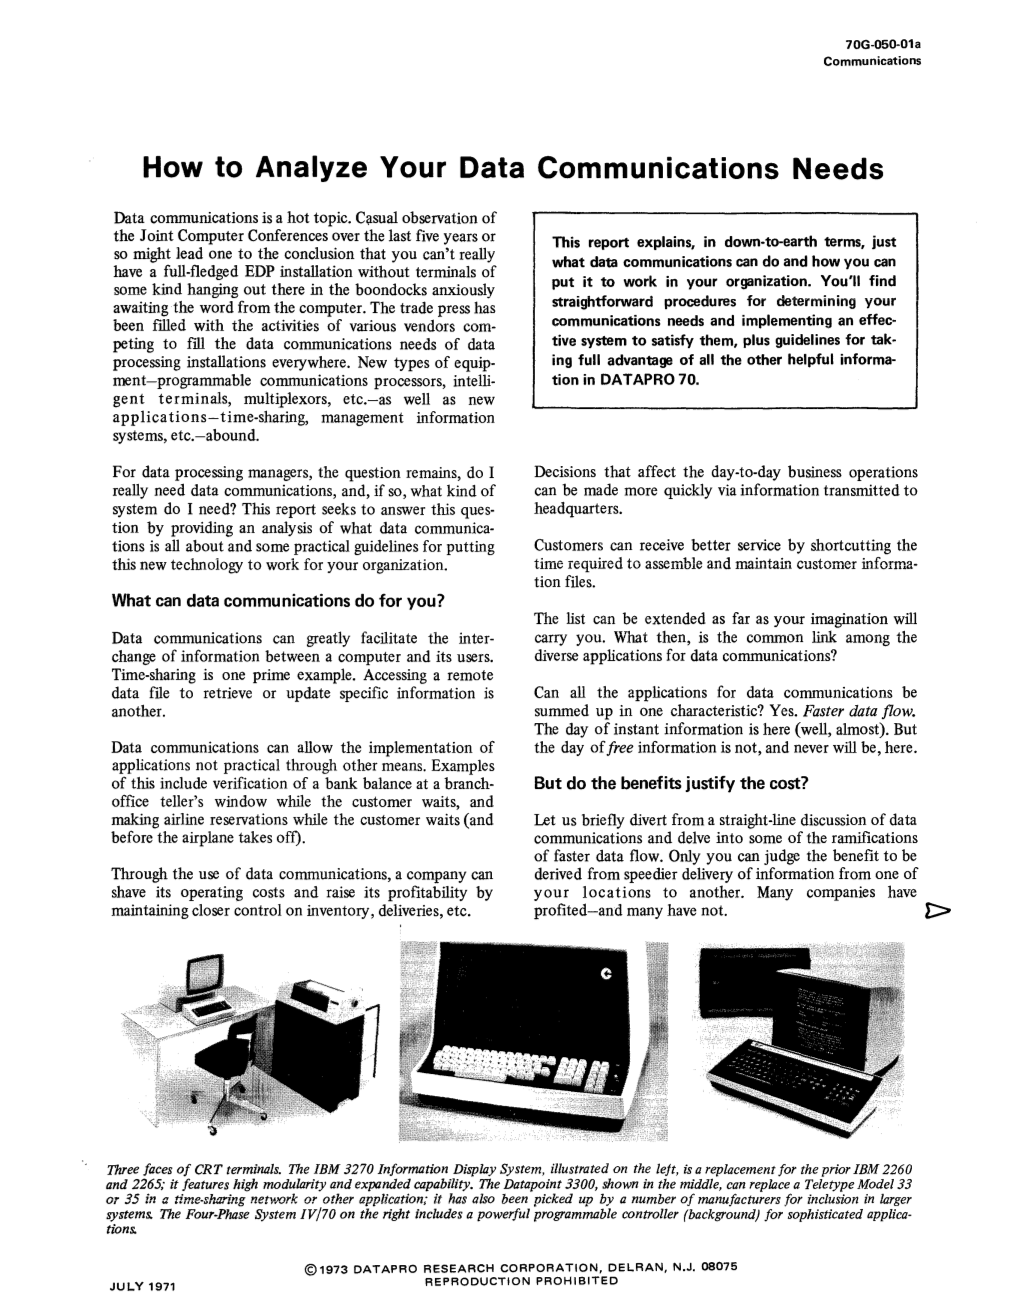 How to Analyze Your Data Communications Needs